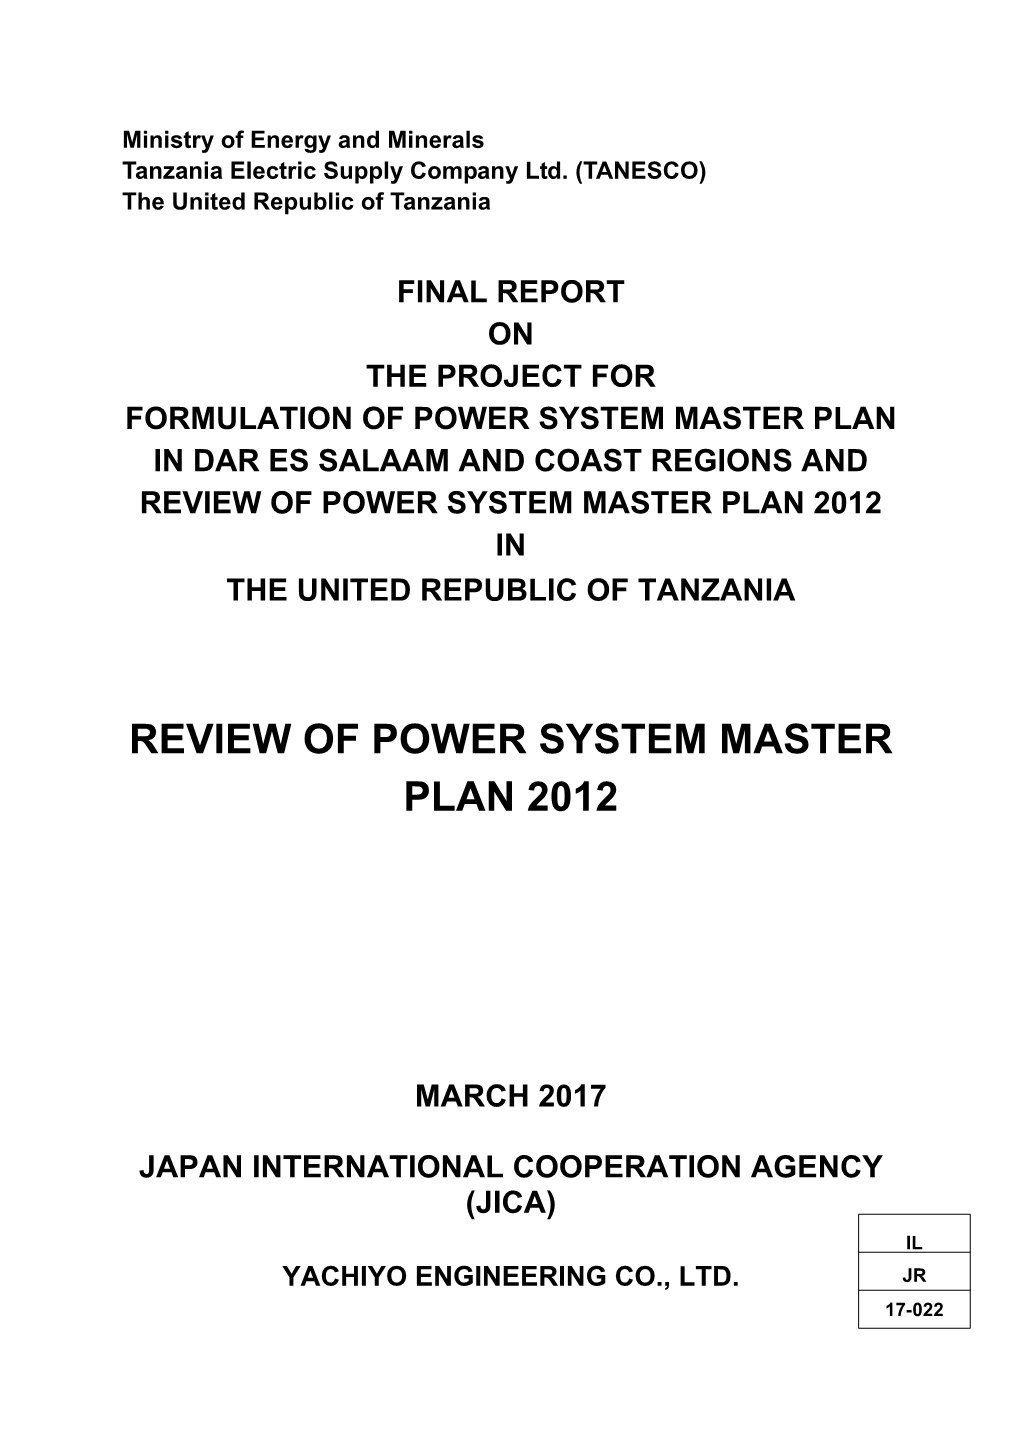 Review of Power System Master Plan 2012 in the United Republic of Tanzania